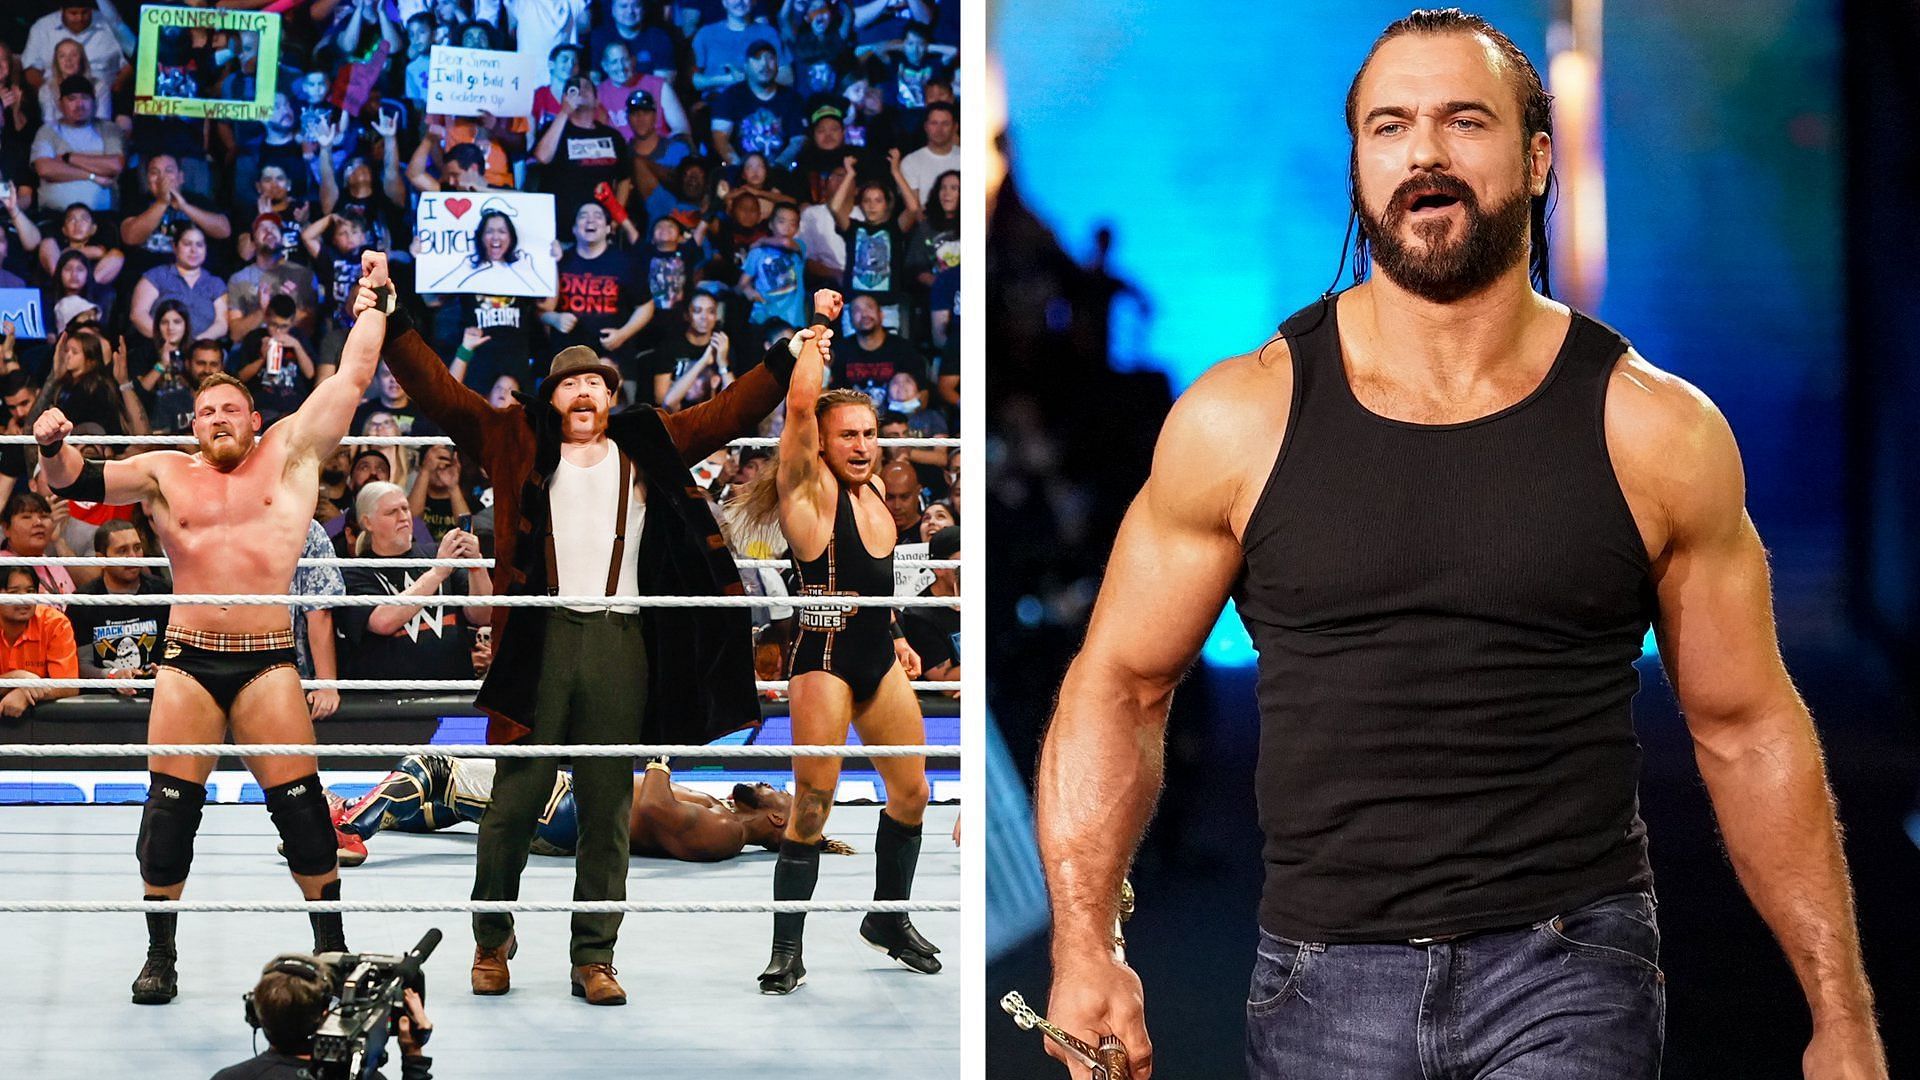 Could other WWE Superstars potentially join The Brawling Brutes?